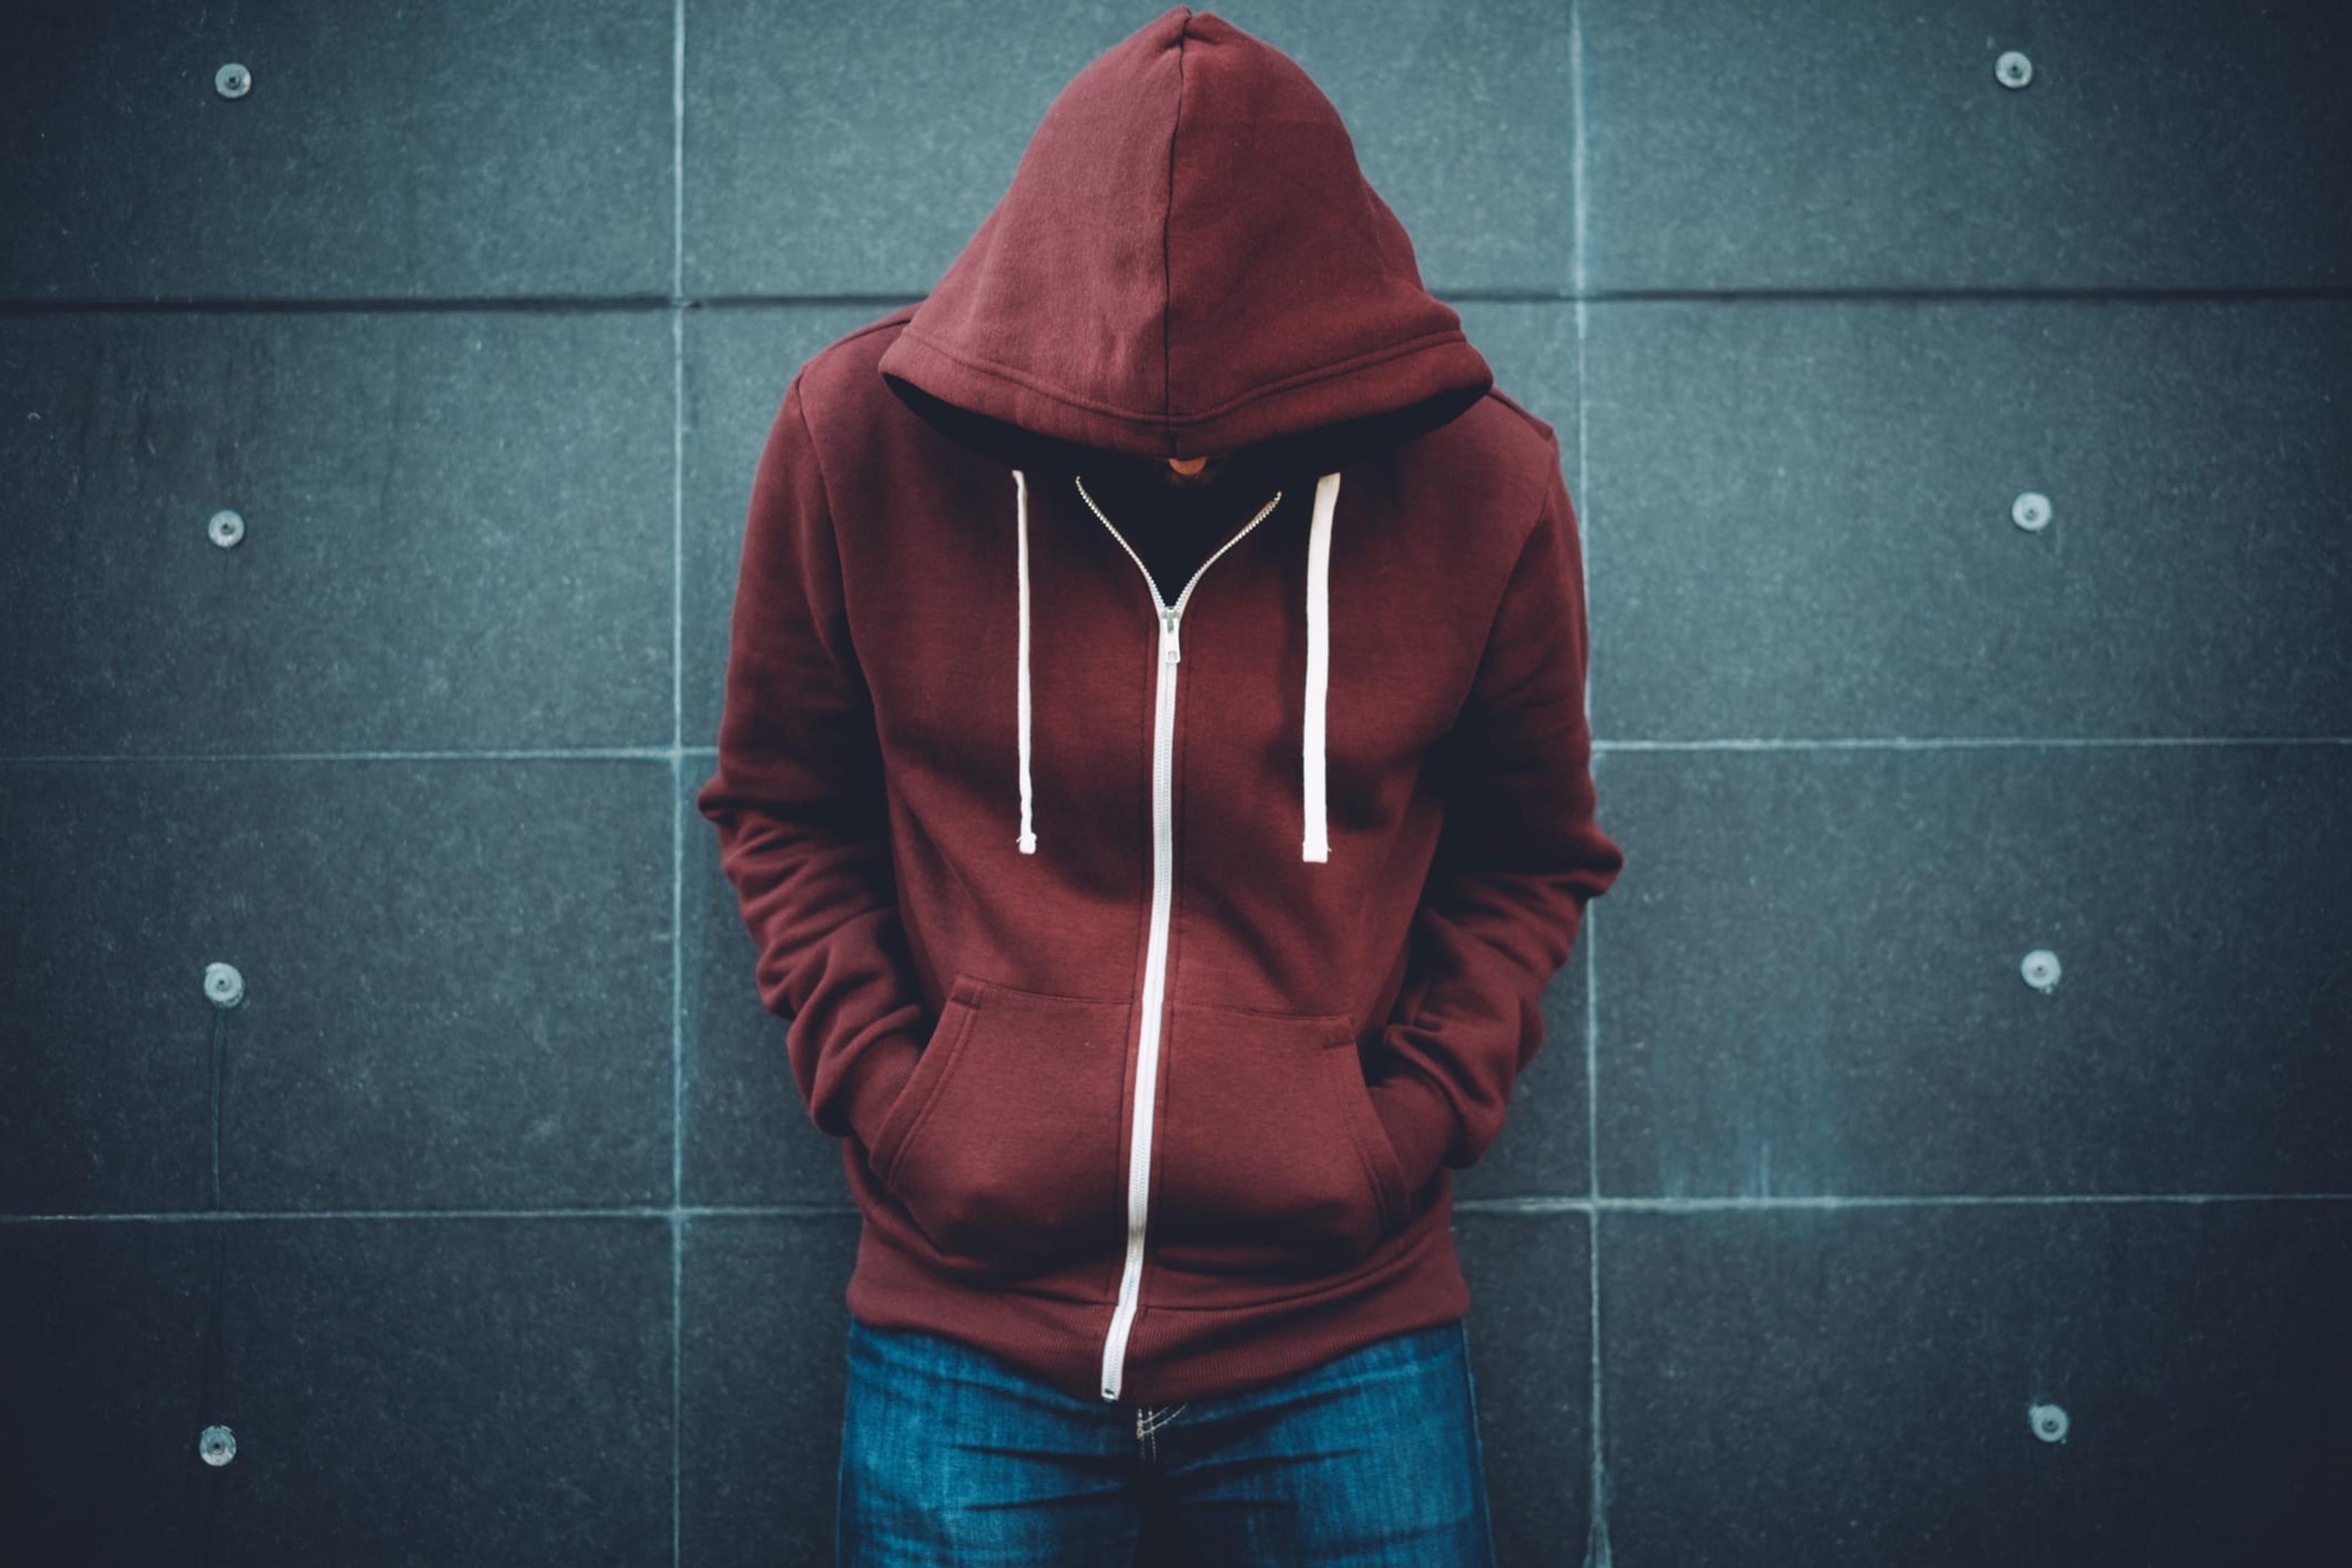 Man with head down, wearing hoodie, leaning against a wall.